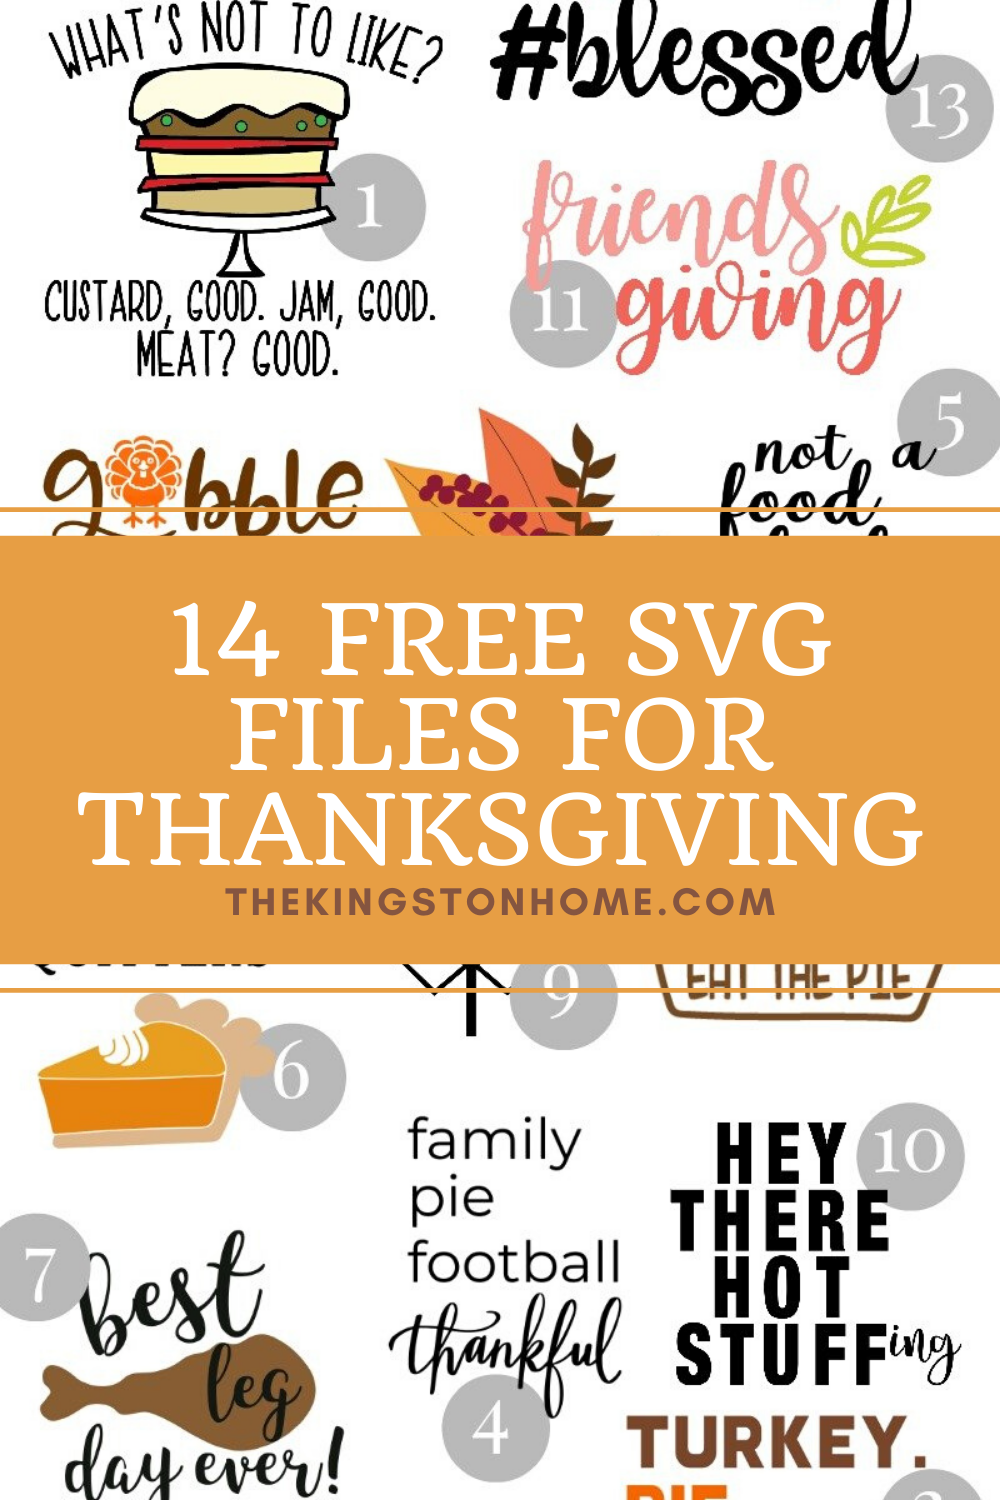 Free Thanksgiving SVG Files for Cricut Machines - The Kingston Home: Make your Thanksgiving a little more festive with these FREE SVG files from me and a few of my favorite people! via @craftykingstons